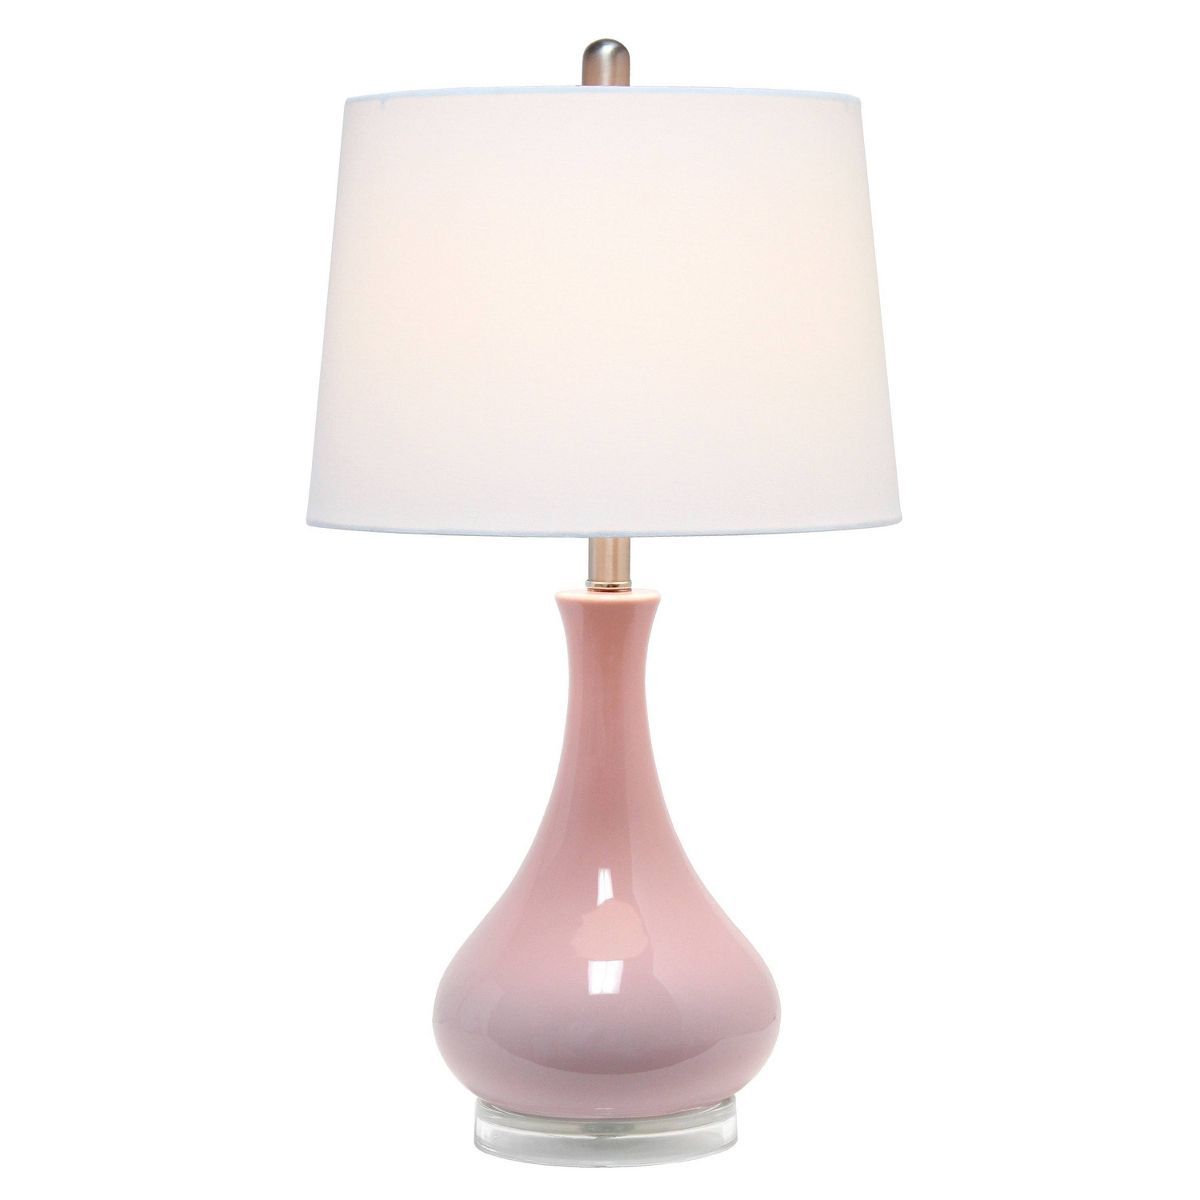 Droplet Table Lamp with Fabric Shade - Lalia Home | Target